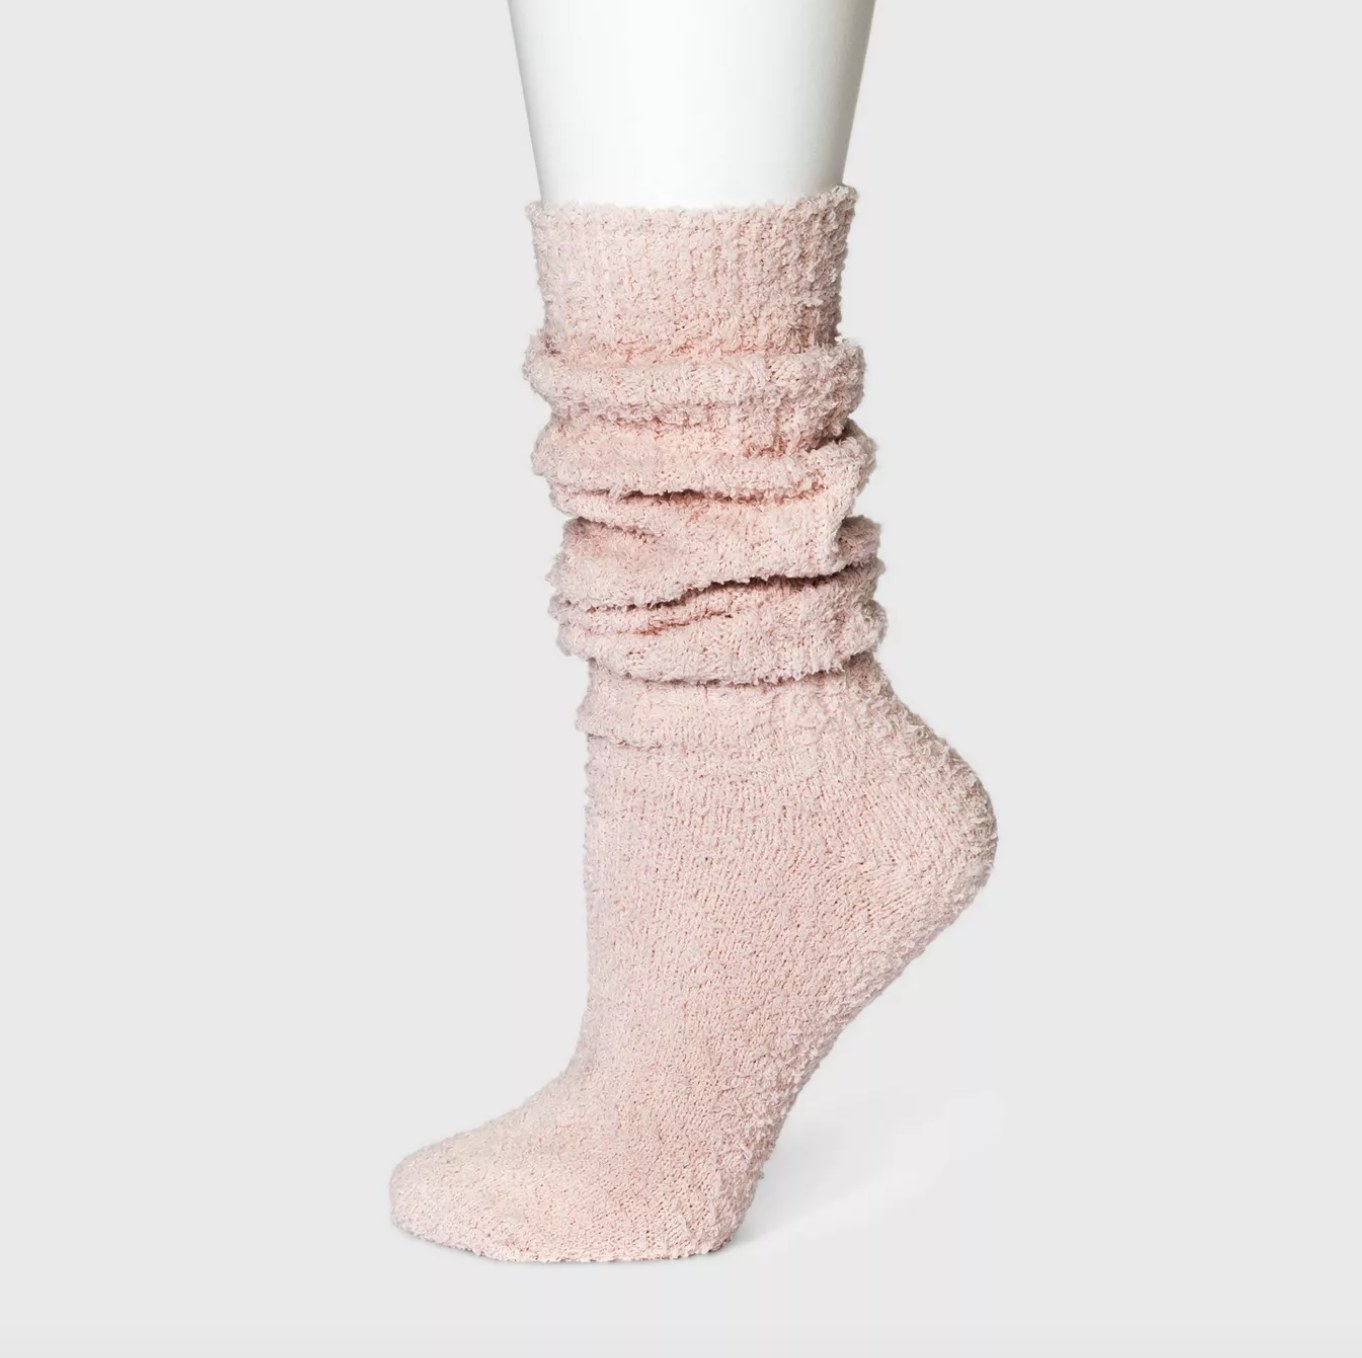 The fluffy pink crew socks slouch right at the ankles